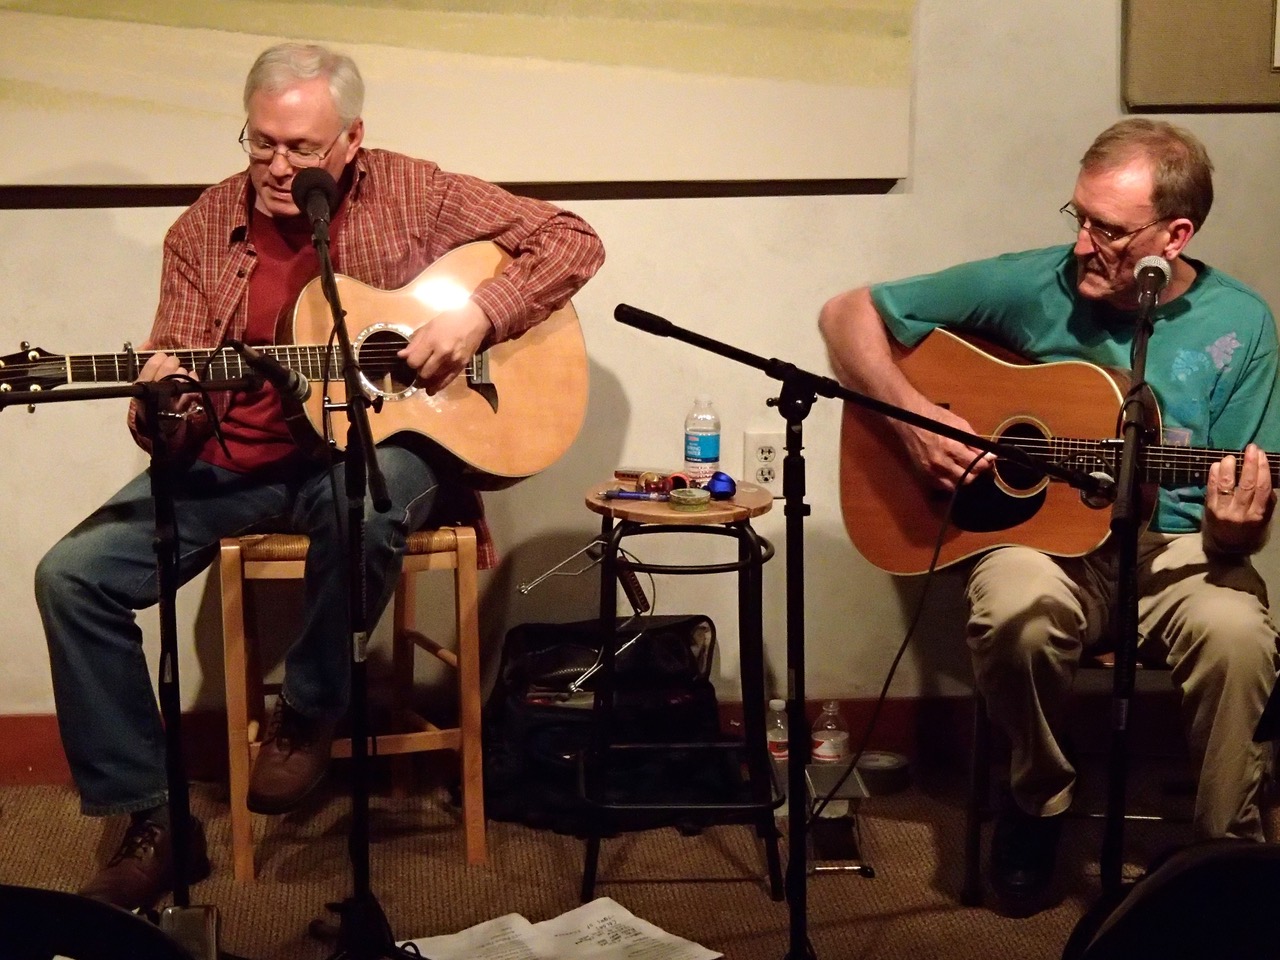 John Heasly & Jerry Schroeder, Sunday, May 8, 2022 - 2-4pm